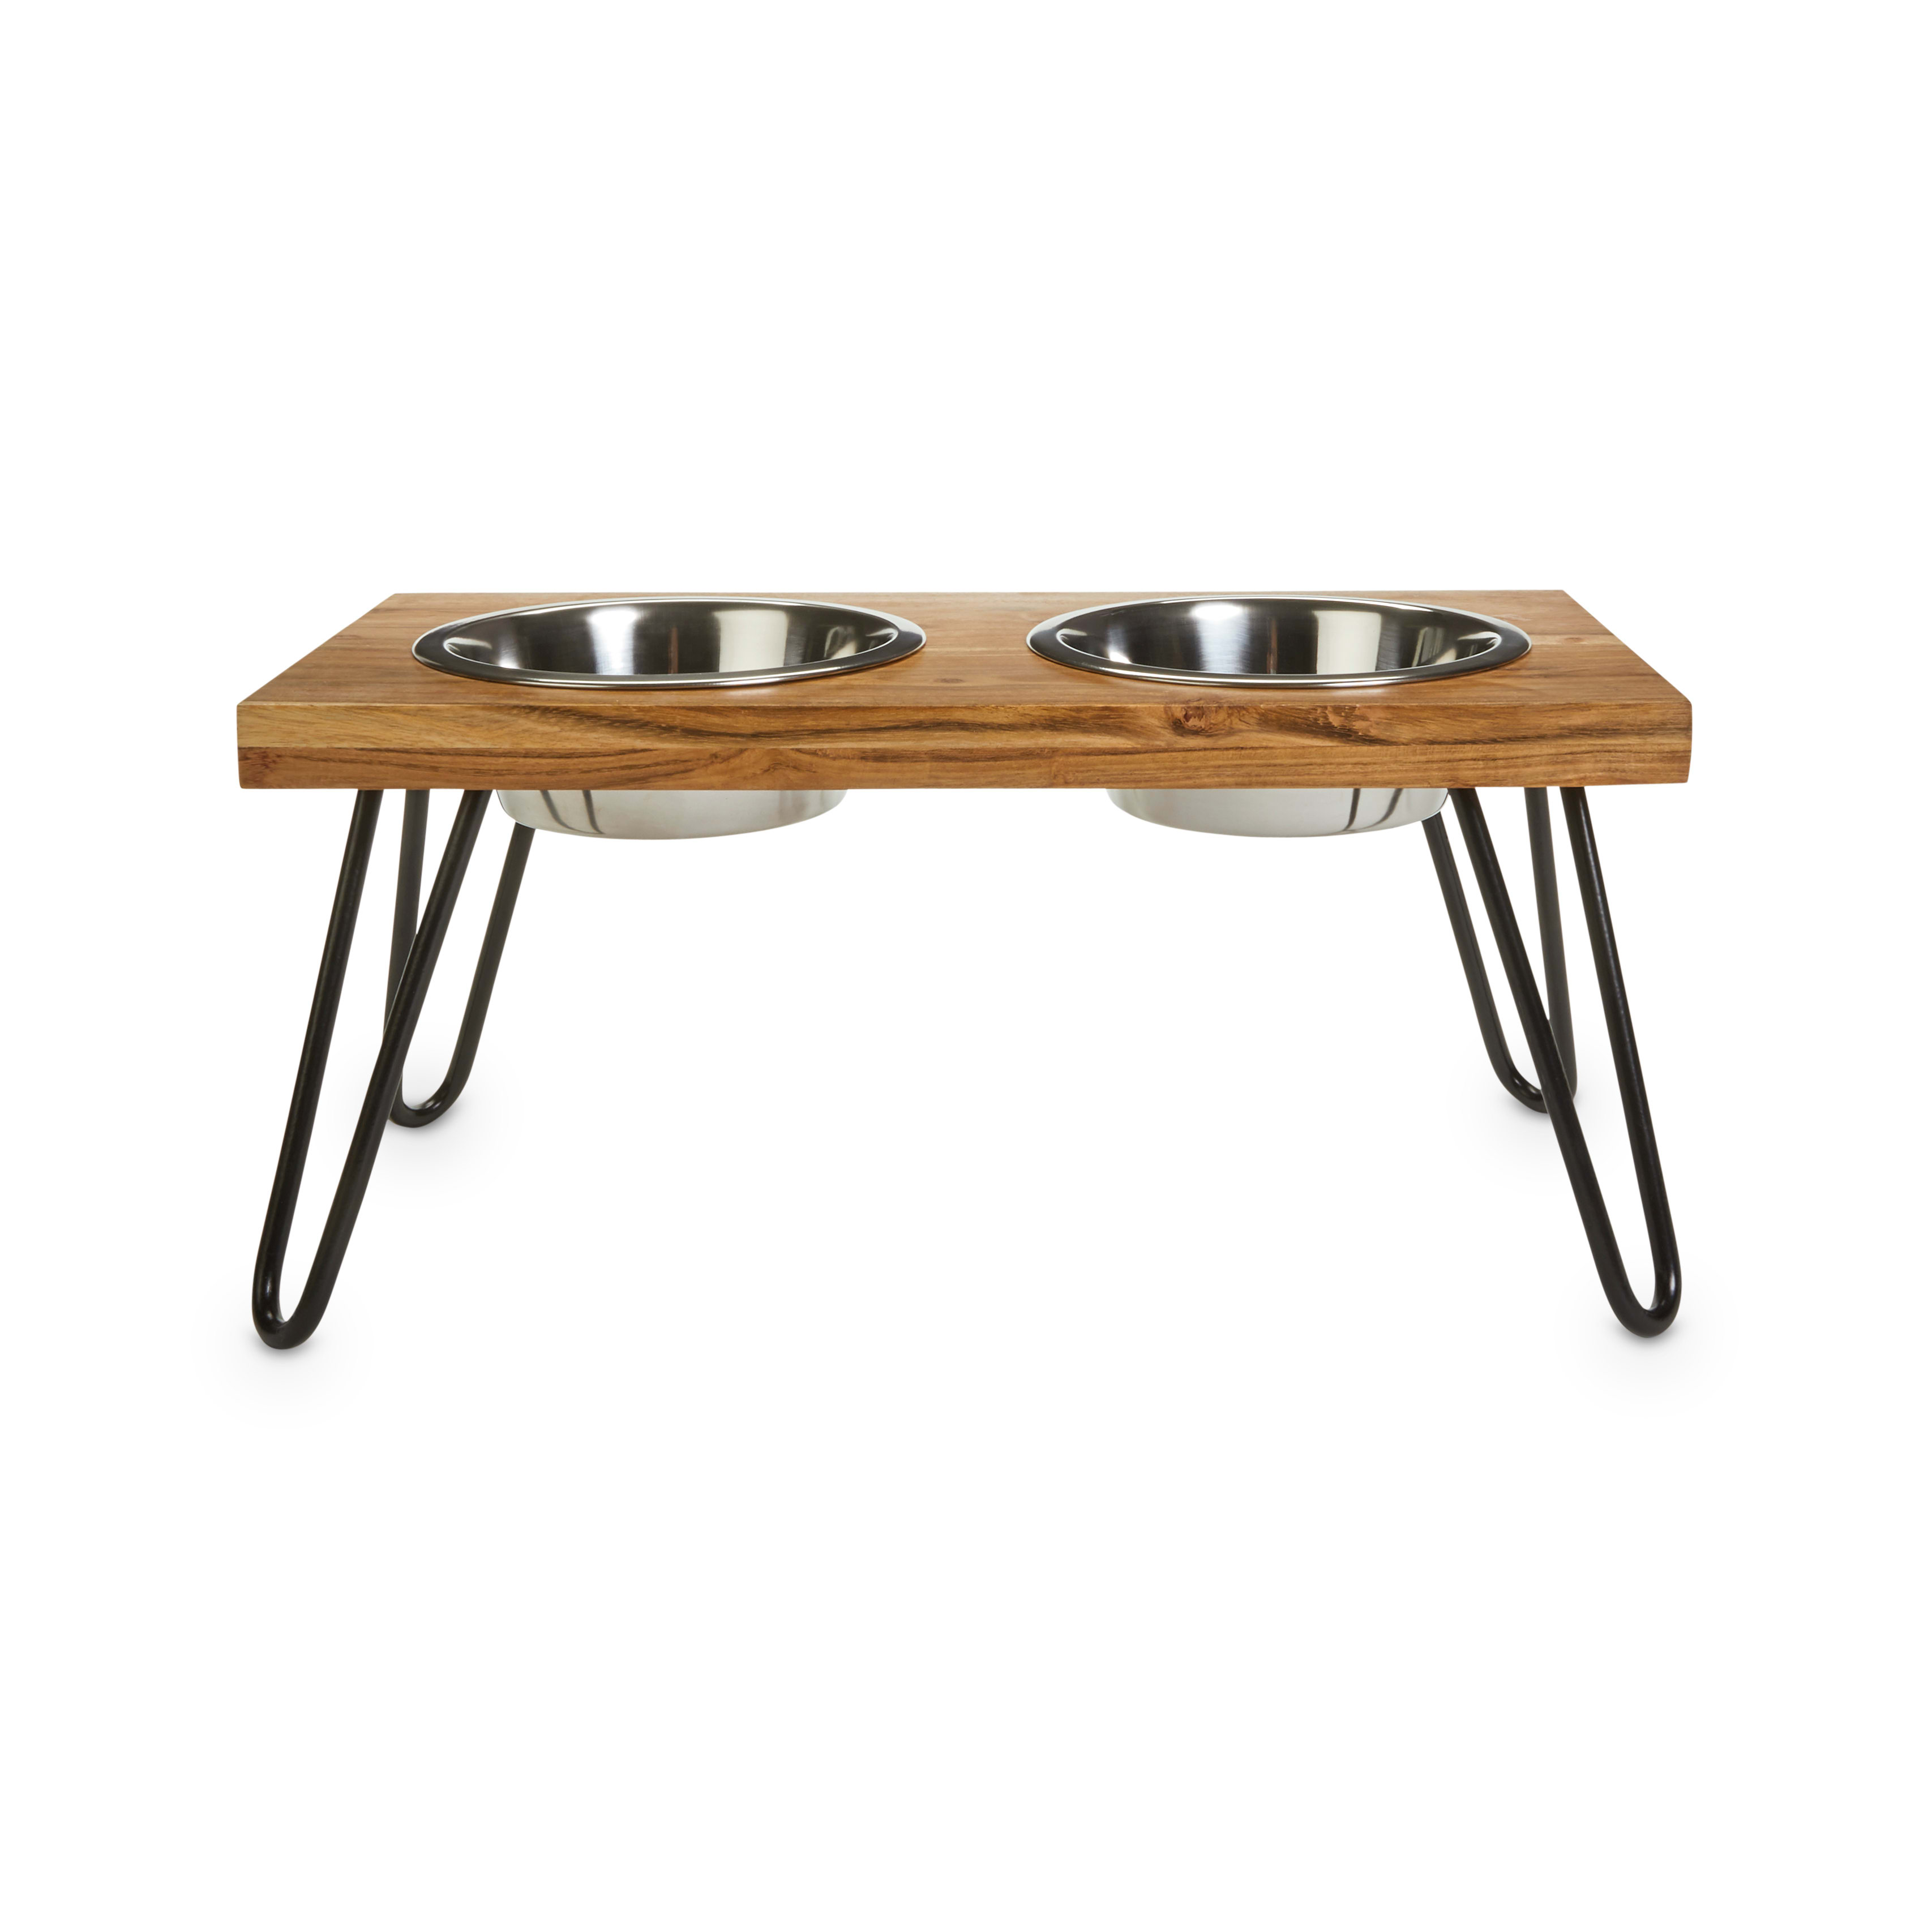 EveryYay Better Together Elevated Wood Double Diner with Stainless-Steel Bowls for Dogs